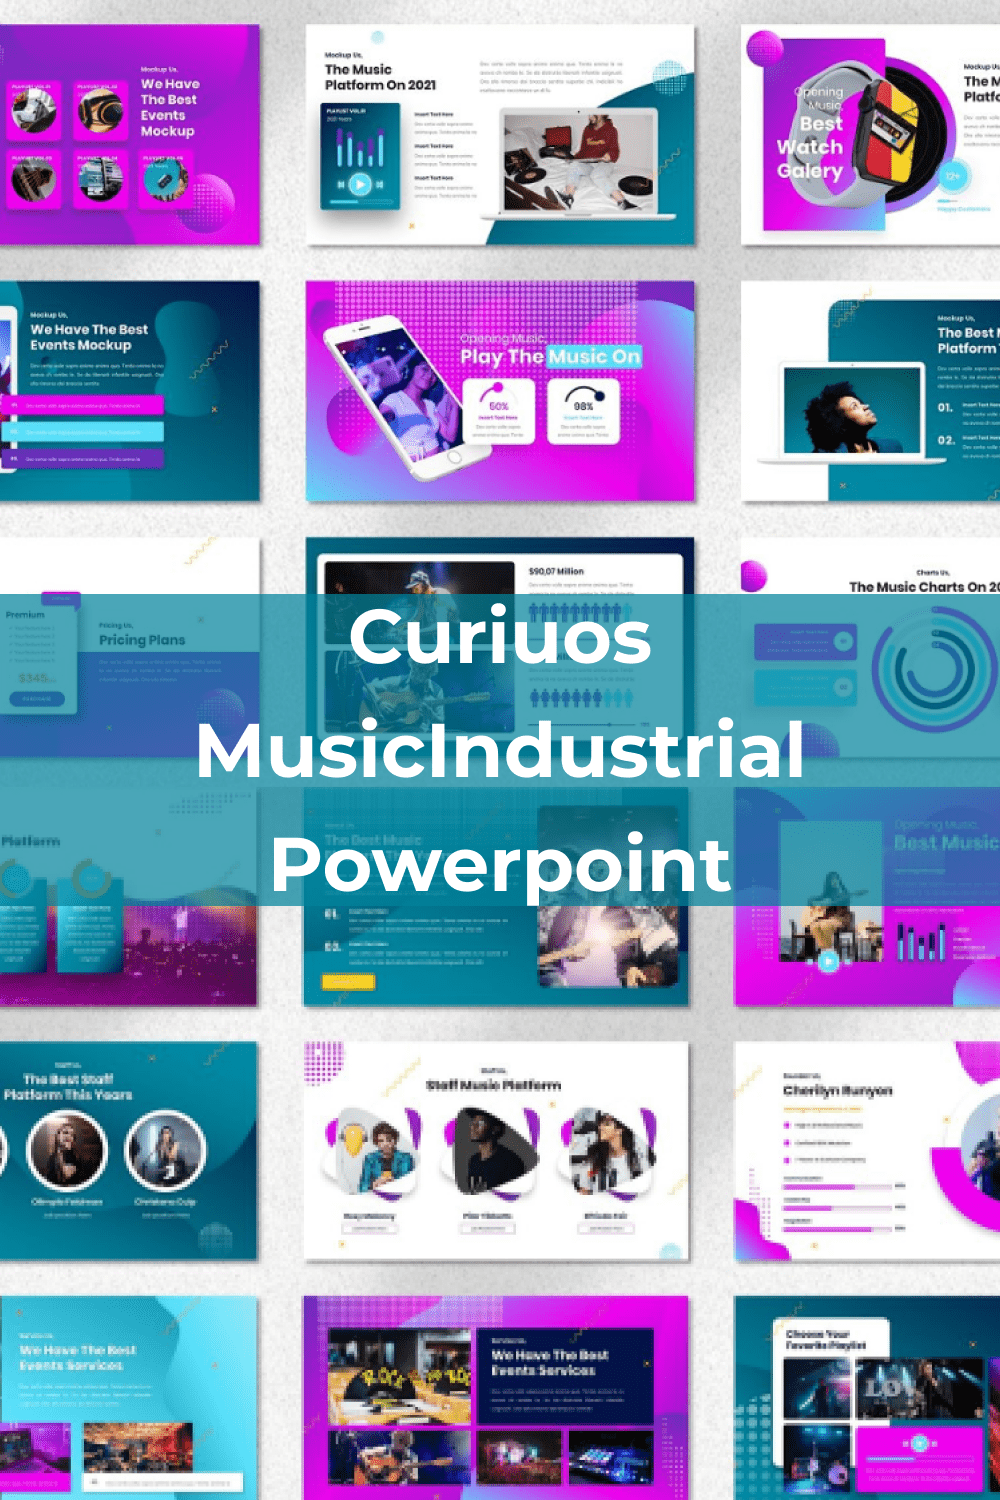 Curiuos - Music Industrial Powerpoint Pinterest.